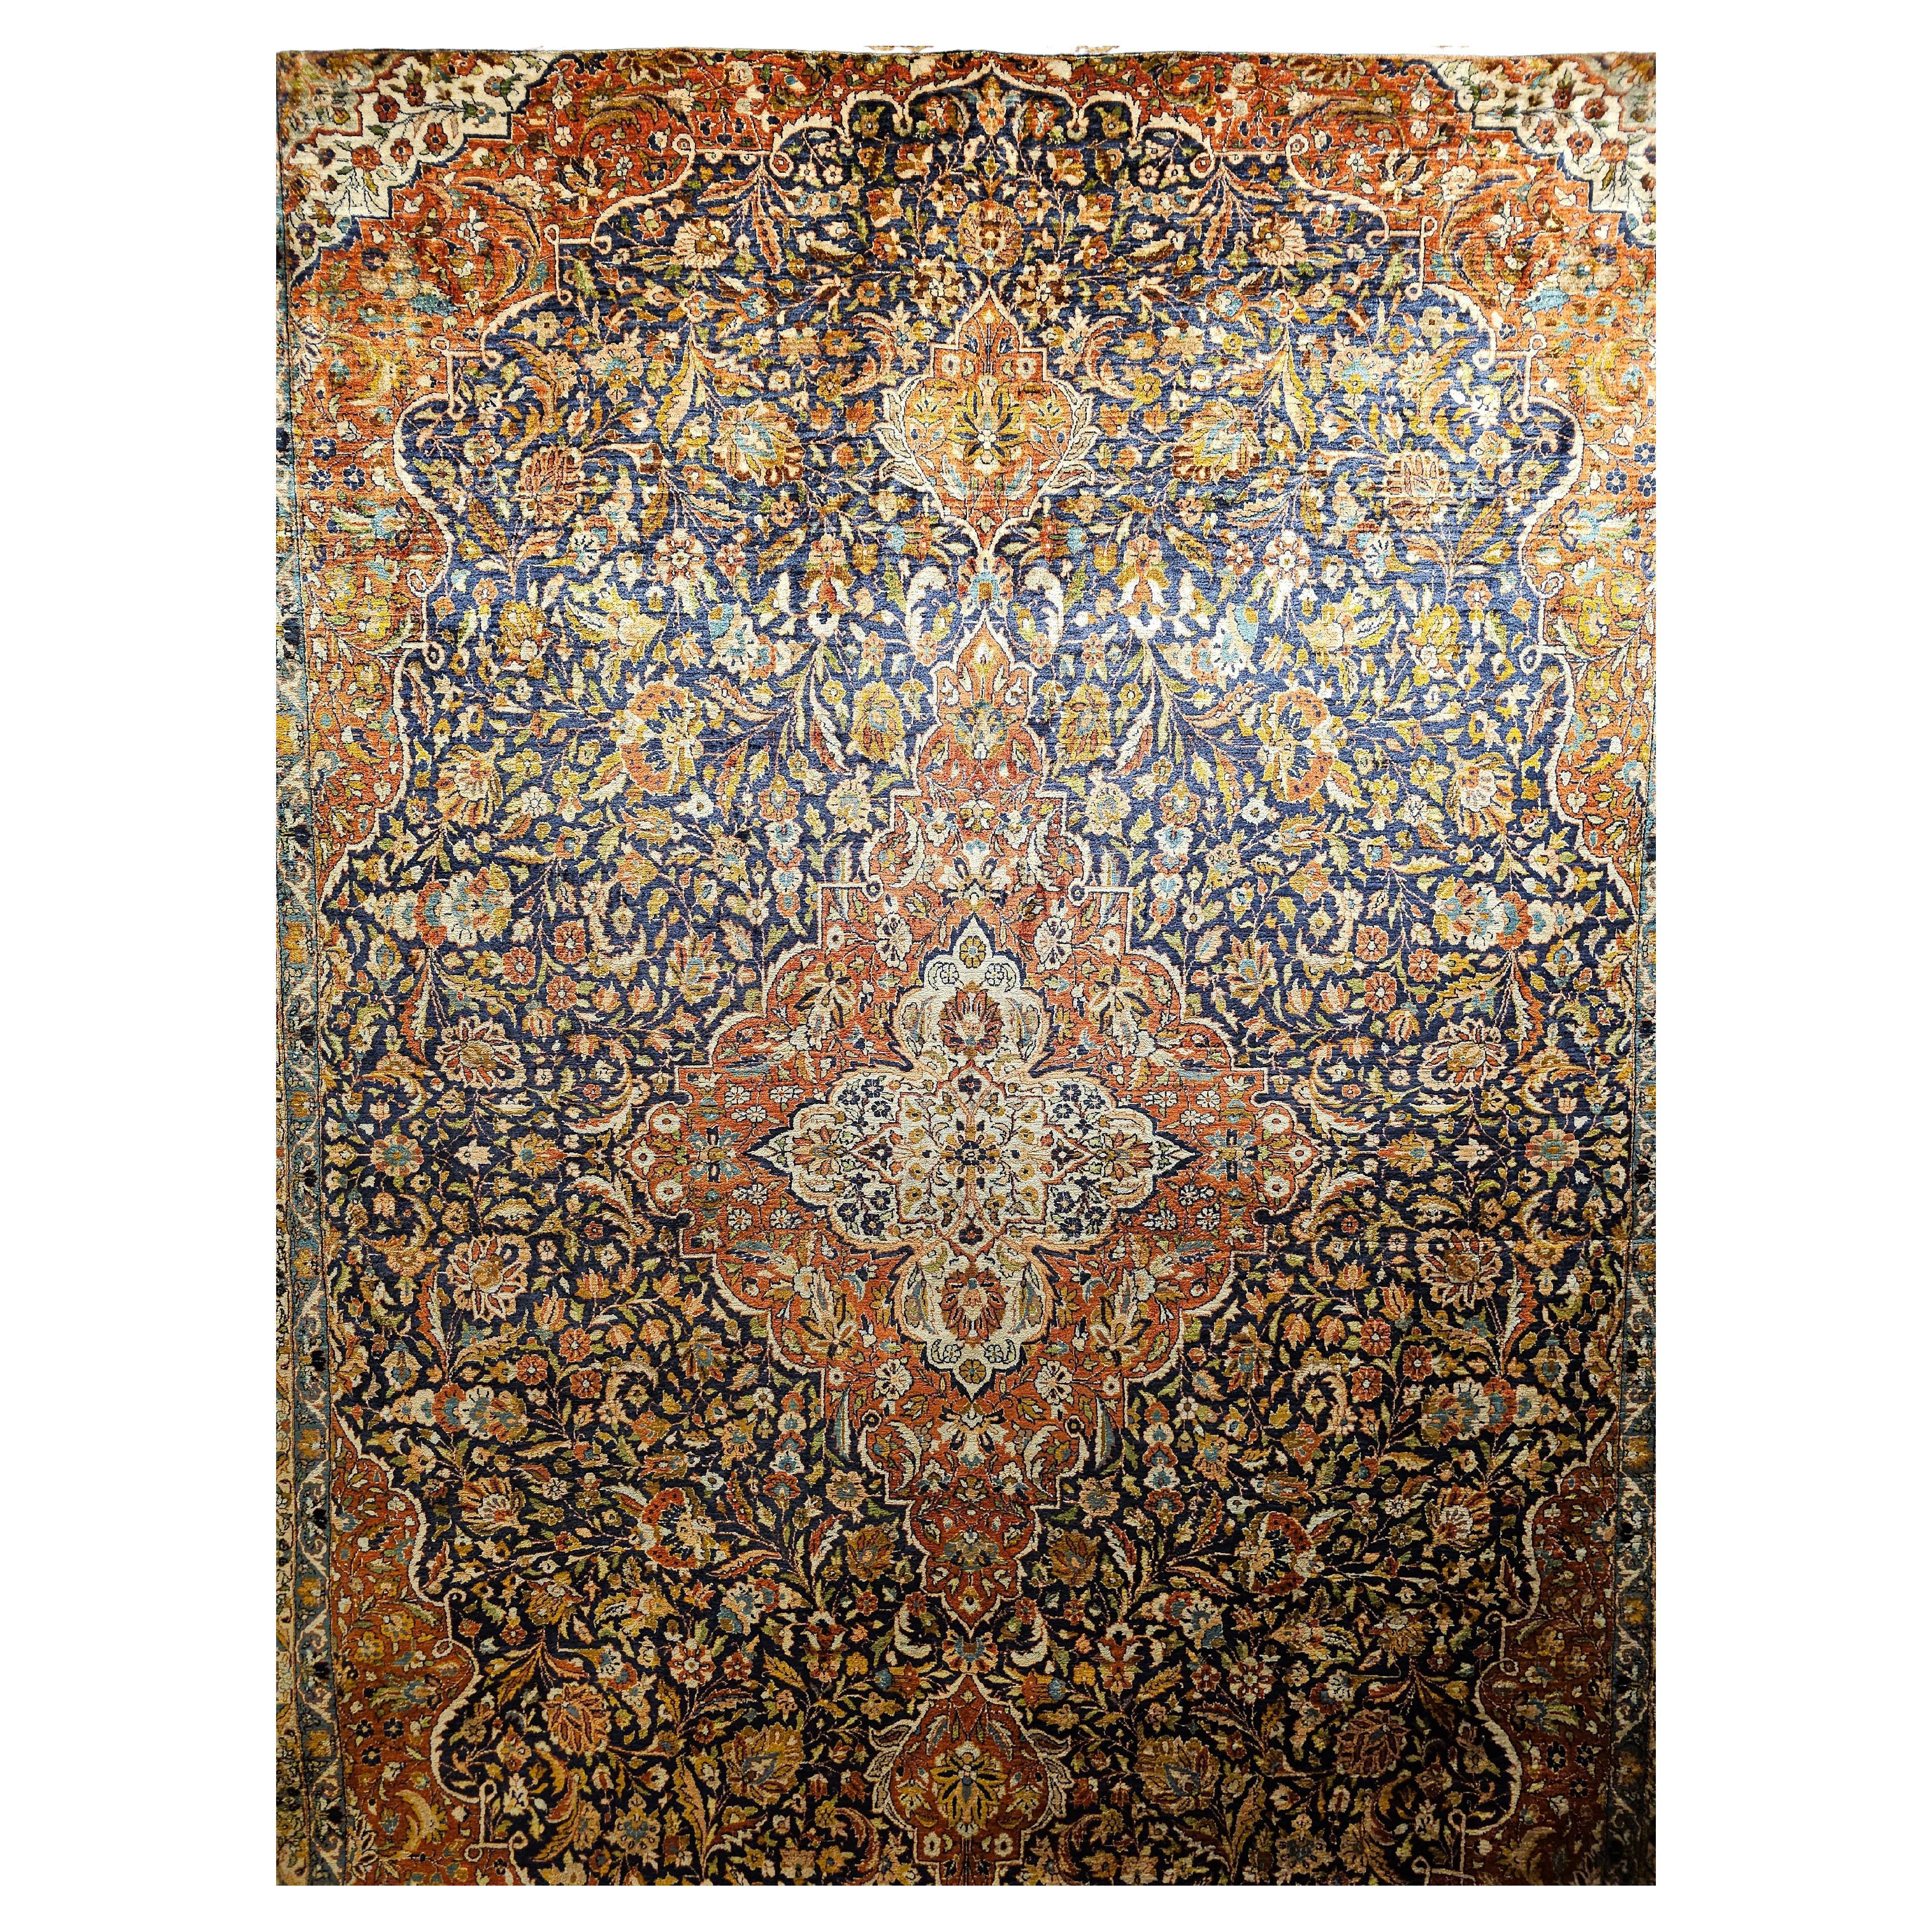 Vintage Persian Silk Tabriz Rug in Floral Design in Navy Blue, Rust, Yellow, Red